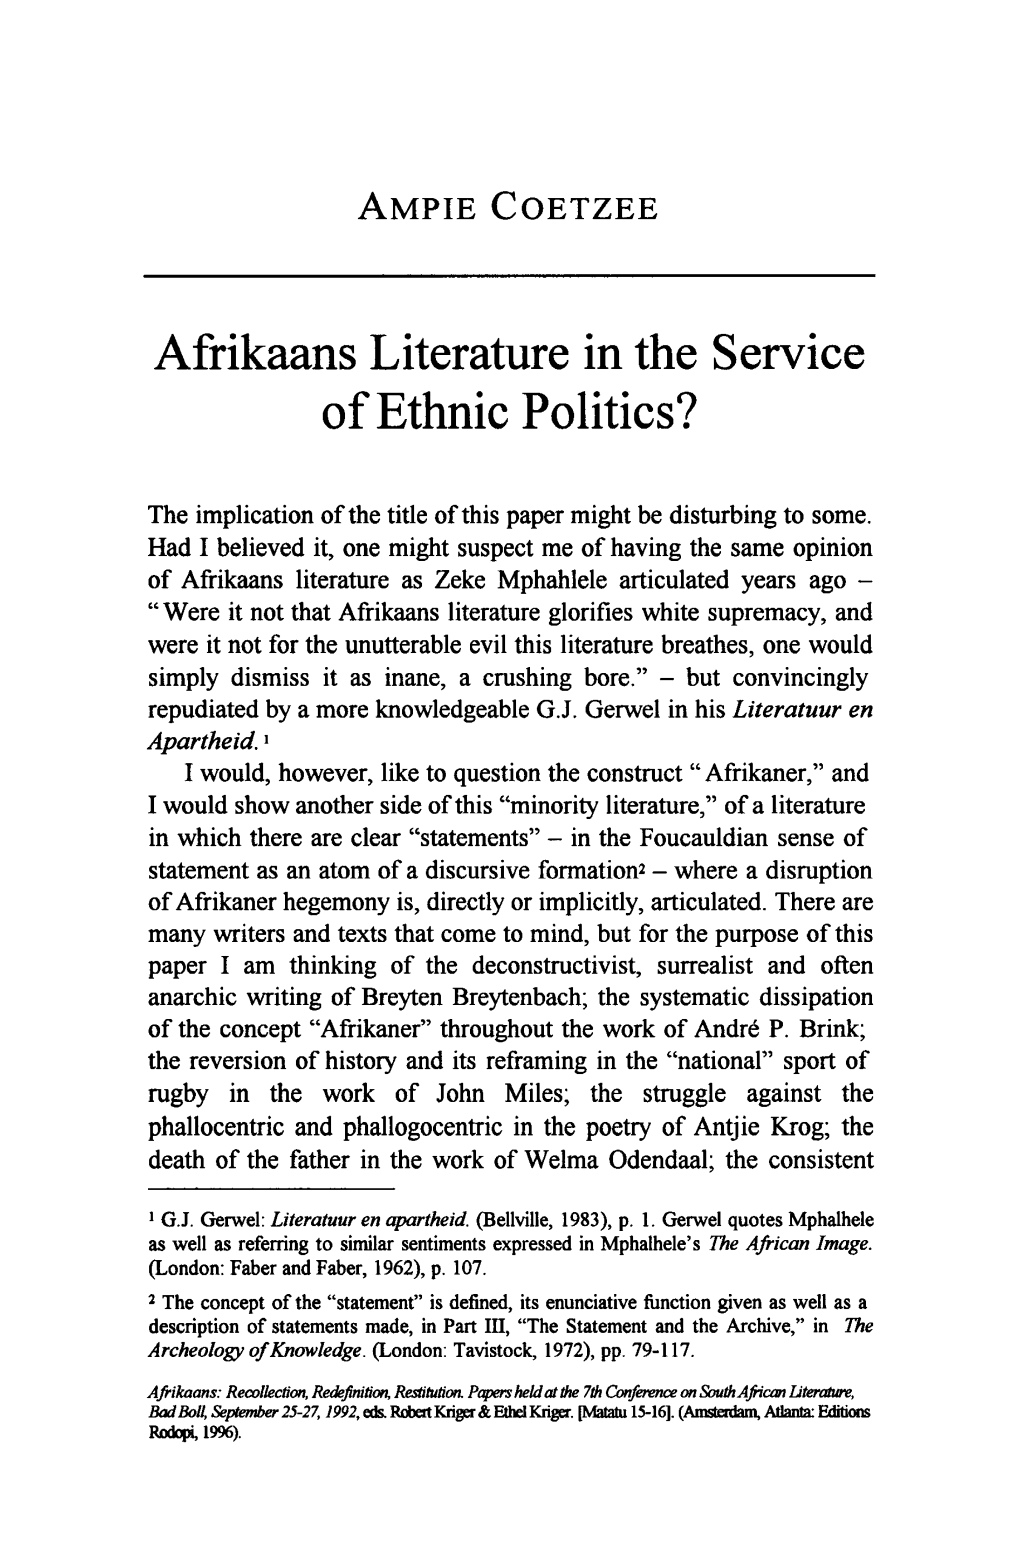 Afrikaans Literature in the Service of Ethnic Politics?